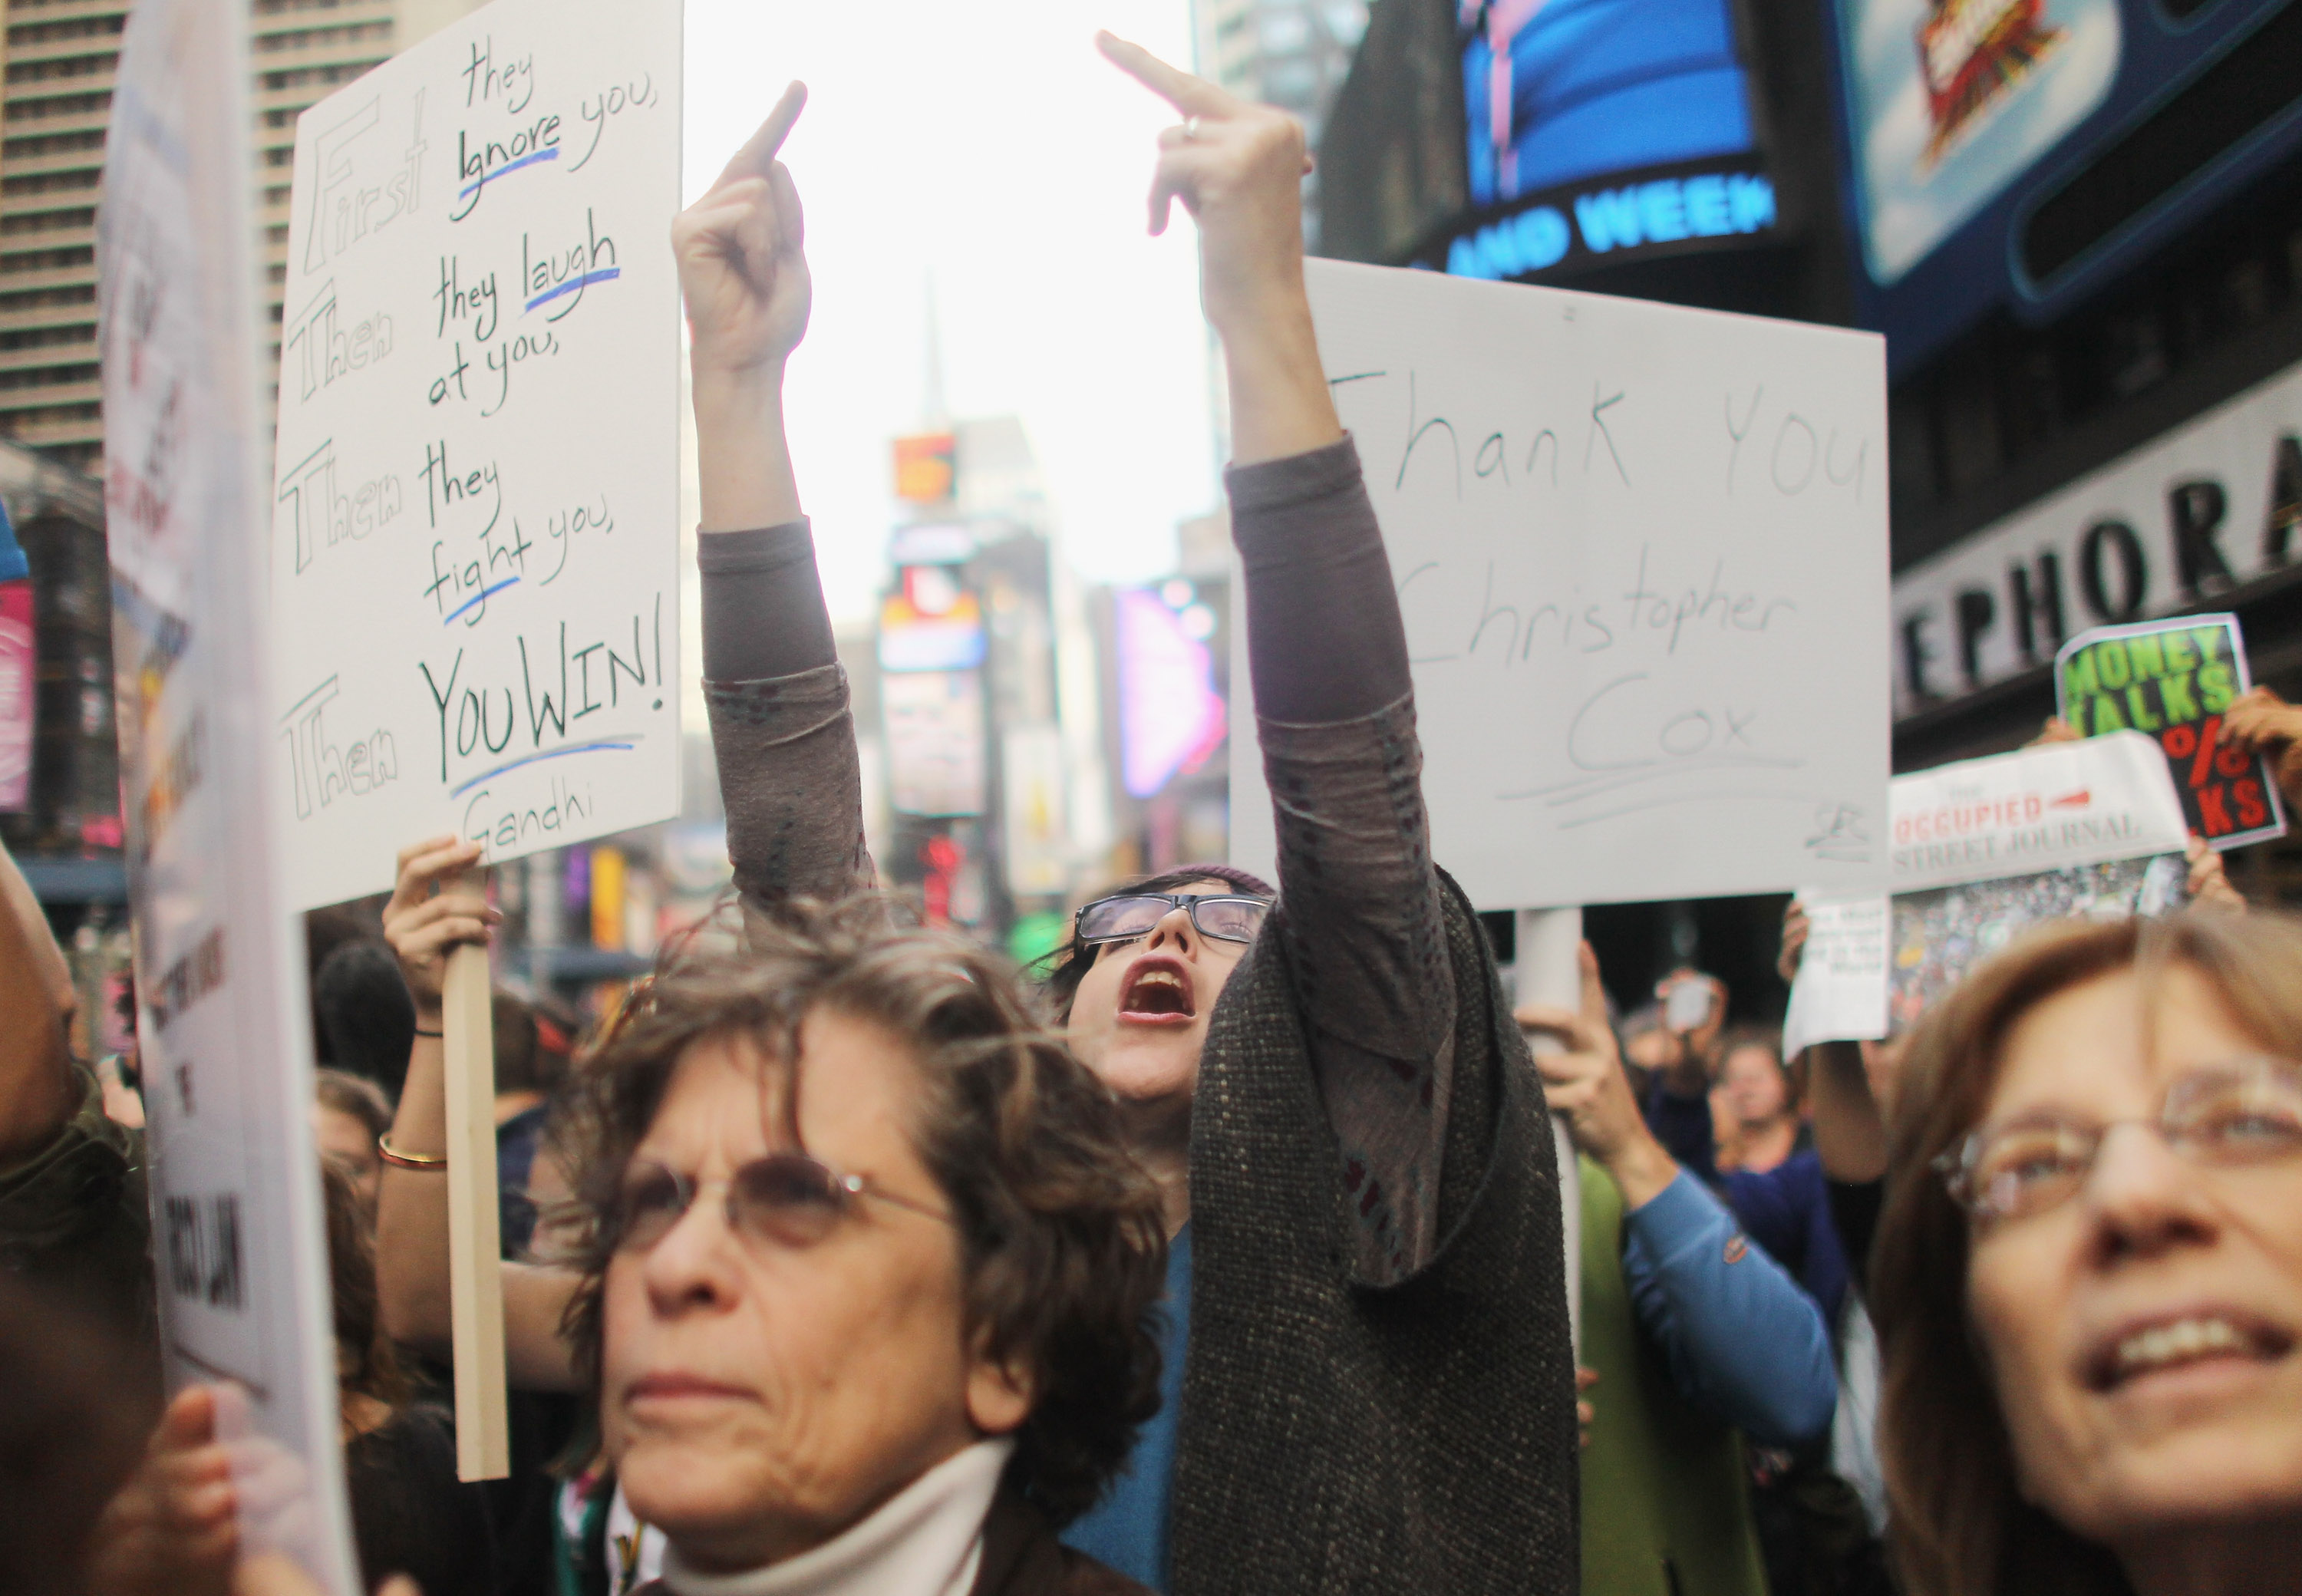 ows-times-square-10-15-11.jpg 